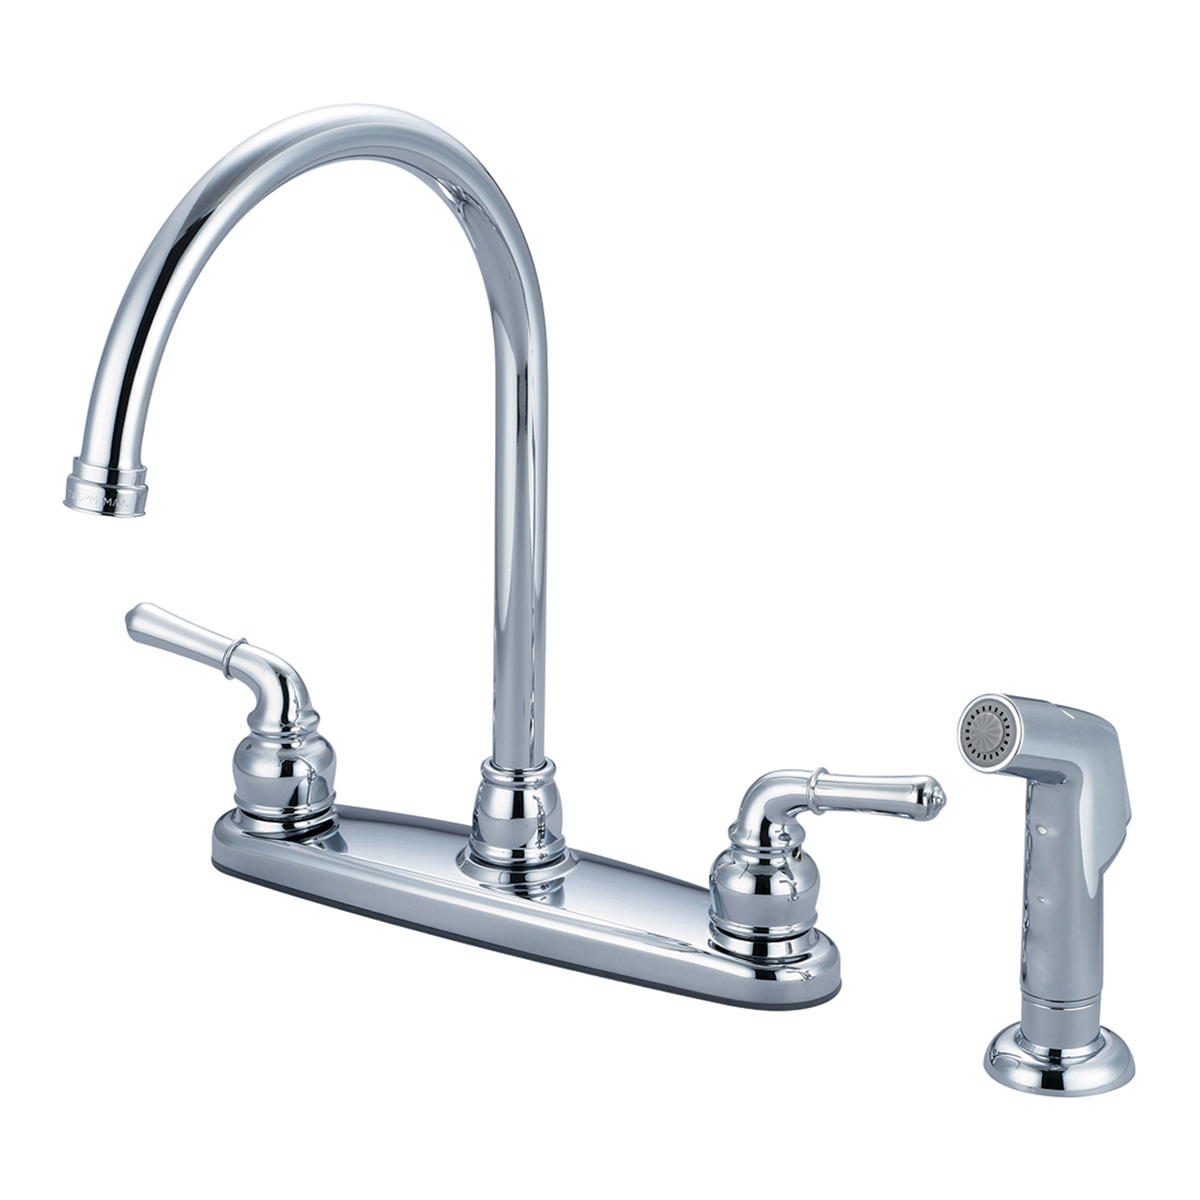 Picture of Accent K-5342 Two Handle Kitchen Faucet - Chrome